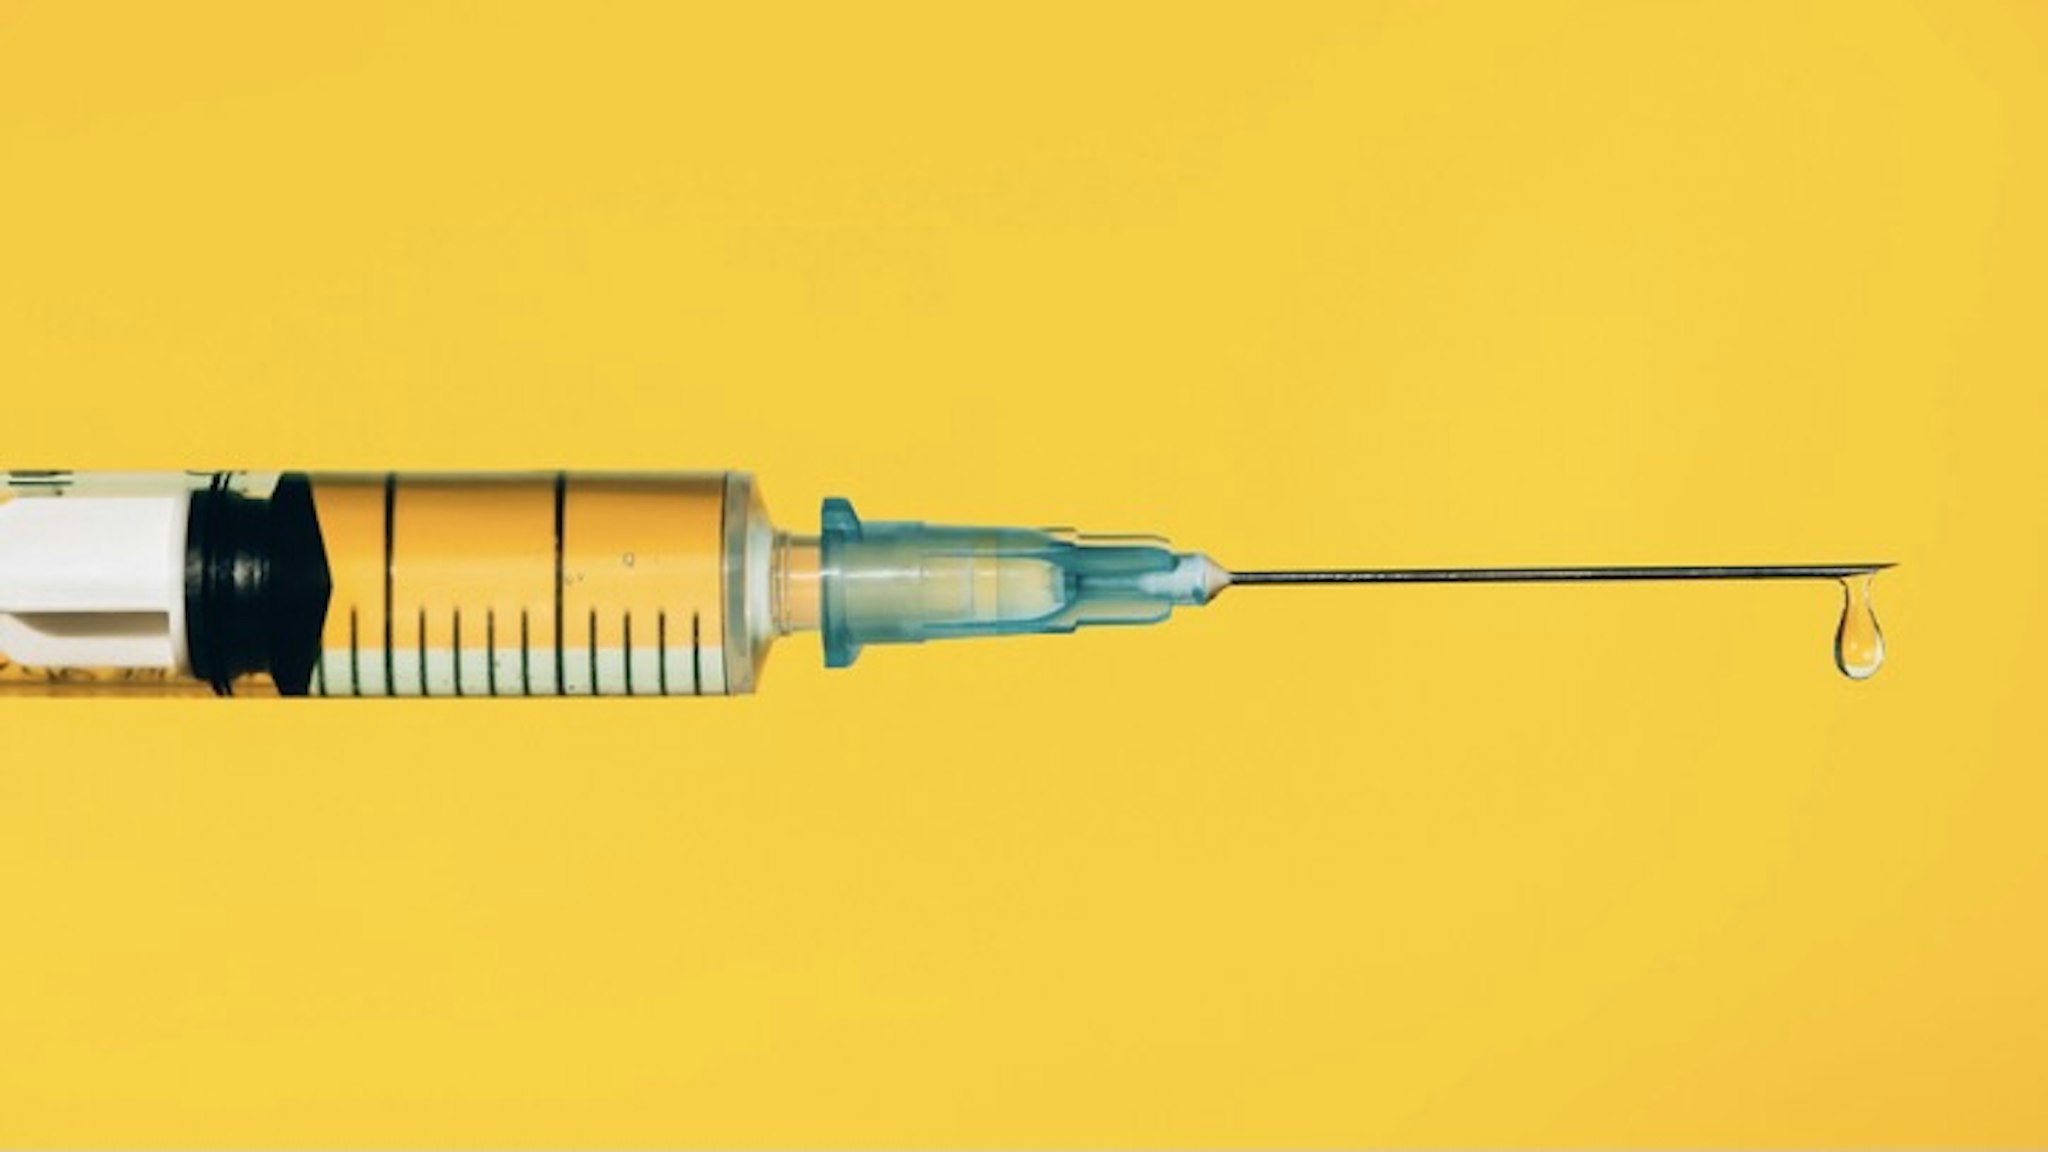 Modern syringe with liquid drug. The most anticipated procedure of the year - stock photo Closeup contemporary disposable syringe with drop of fluid medication on needle placed against vivid yellow background. Vaccination is the most anticipated procedure of the year. Research of coronavirus disease protection concept. Covid-19 vaccine studies. Anna Efetova via Getty Images